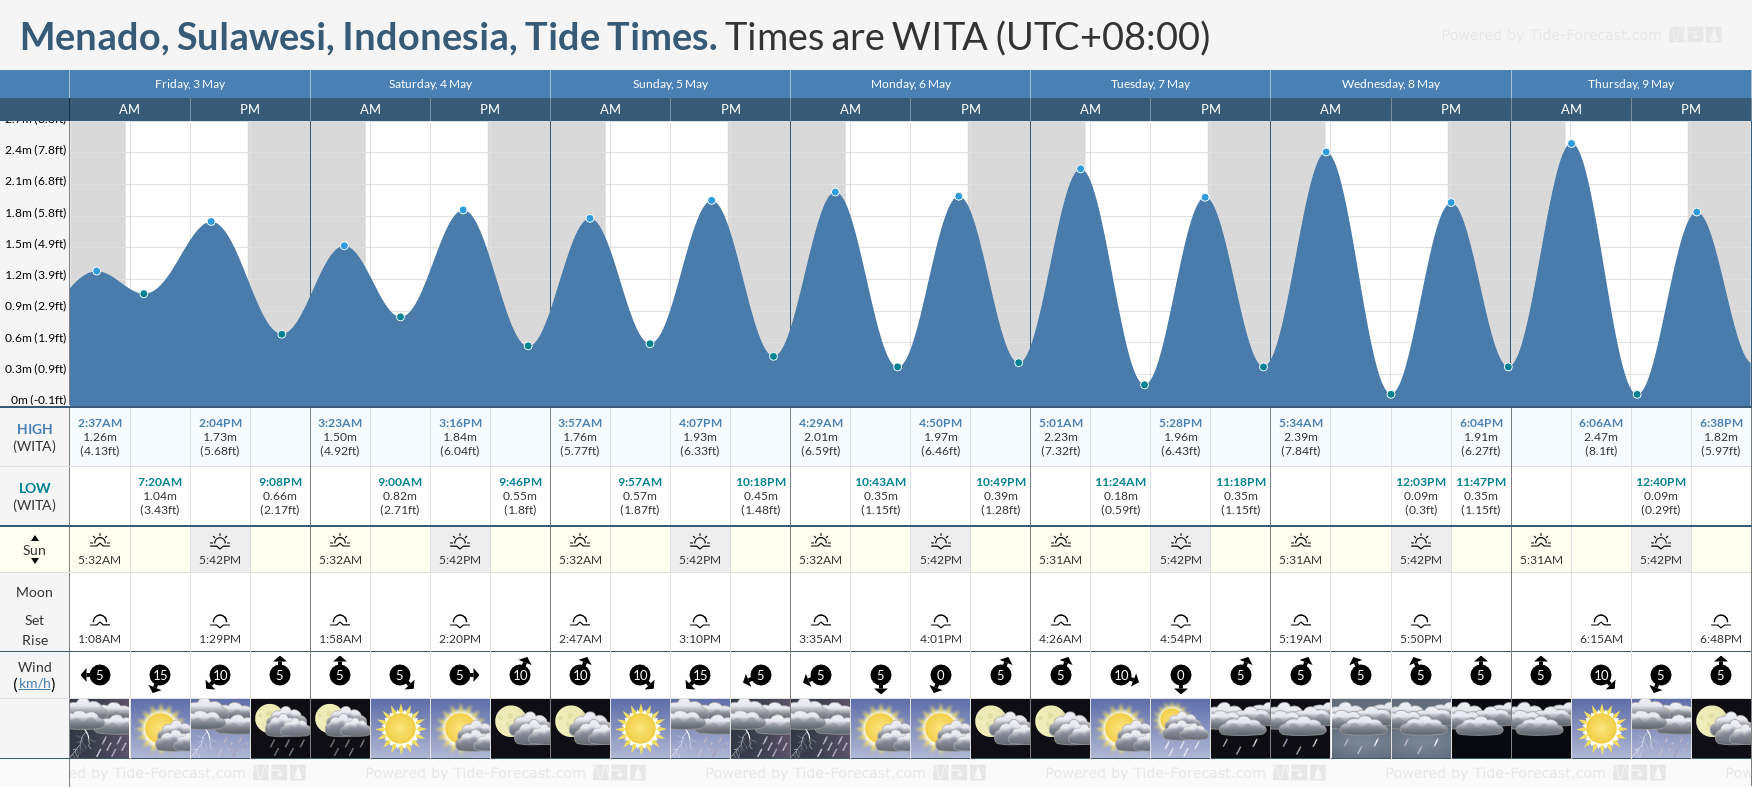 Menado, Sulawesi, Indonesia Tide Chart including high and low tide tide times for the next 7 days